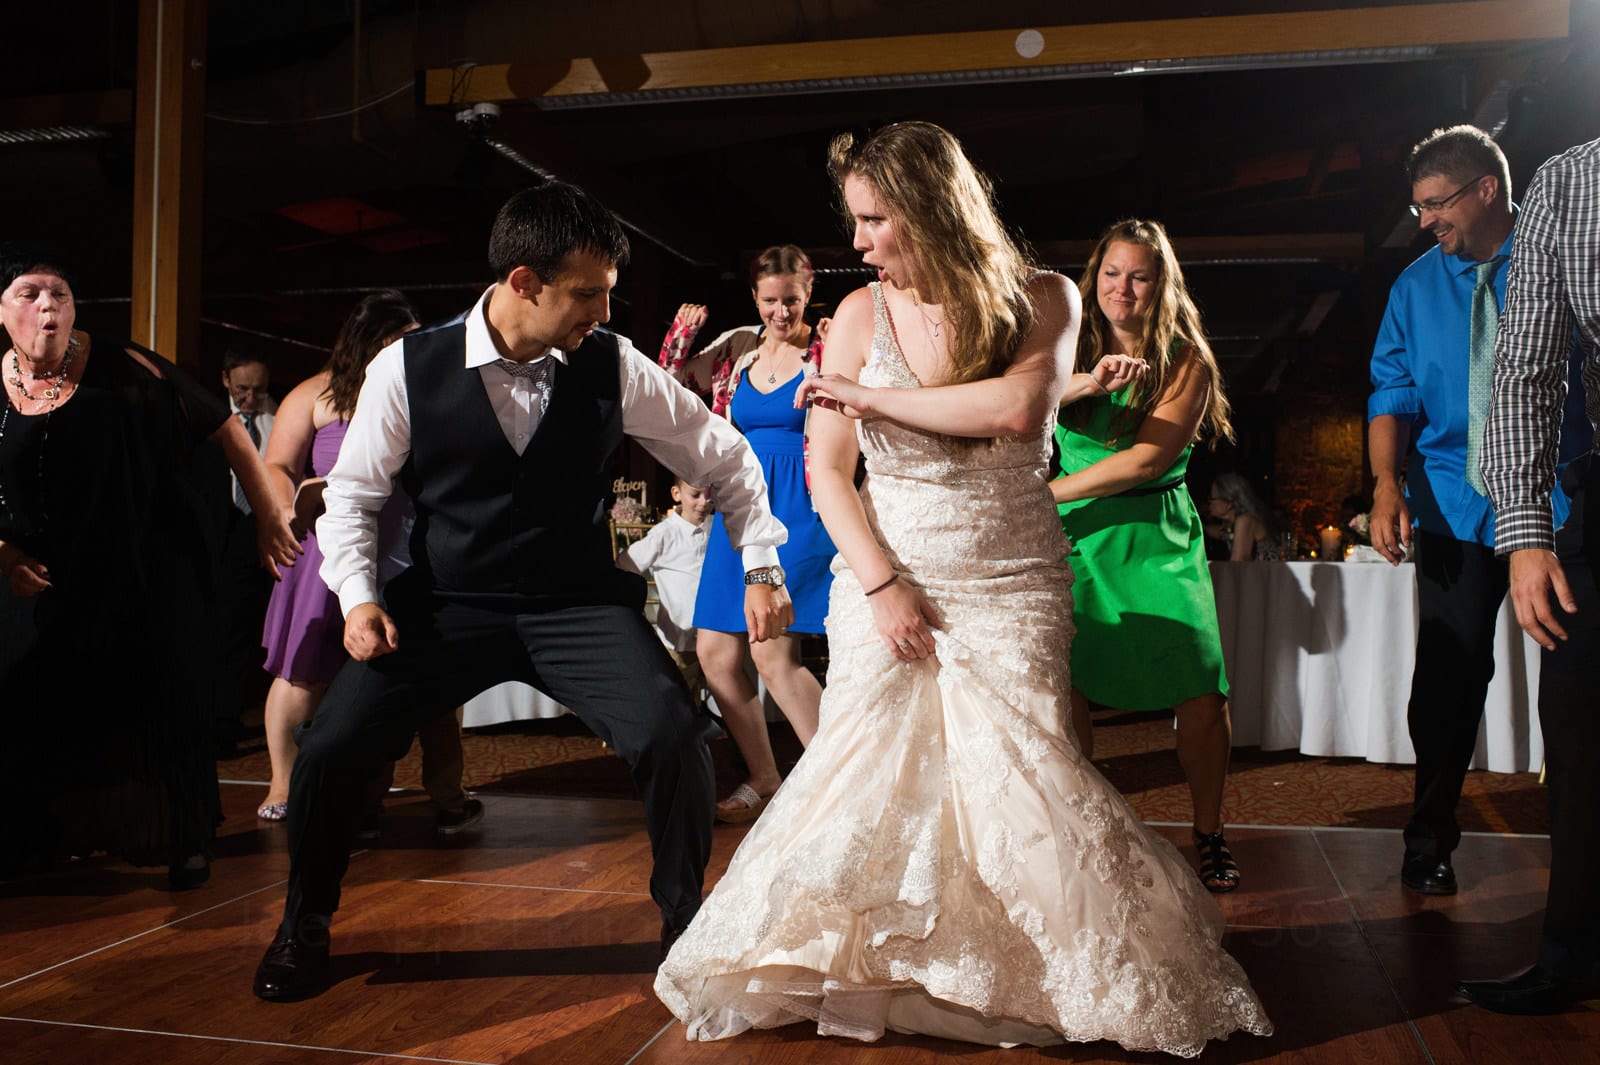 A bride and groom dance side by side while surrounded by guests during their fall wedding at Seven Springs.